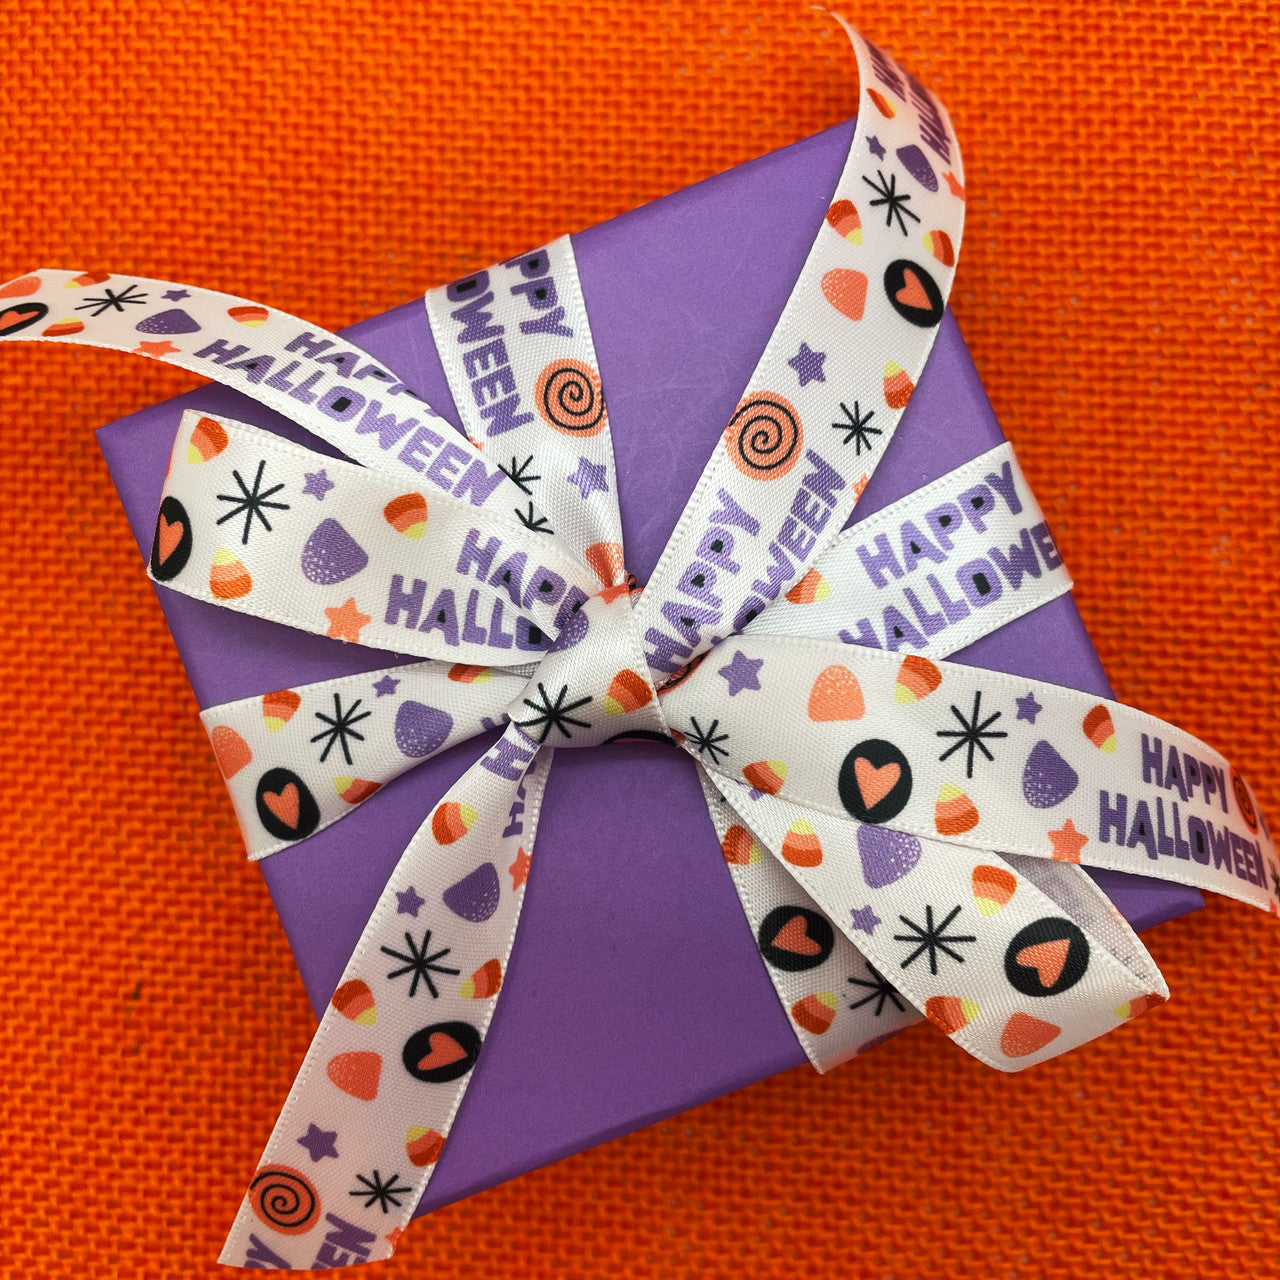 Tie a pretty bow on a Halloween gift or treat to make that gift extra special!